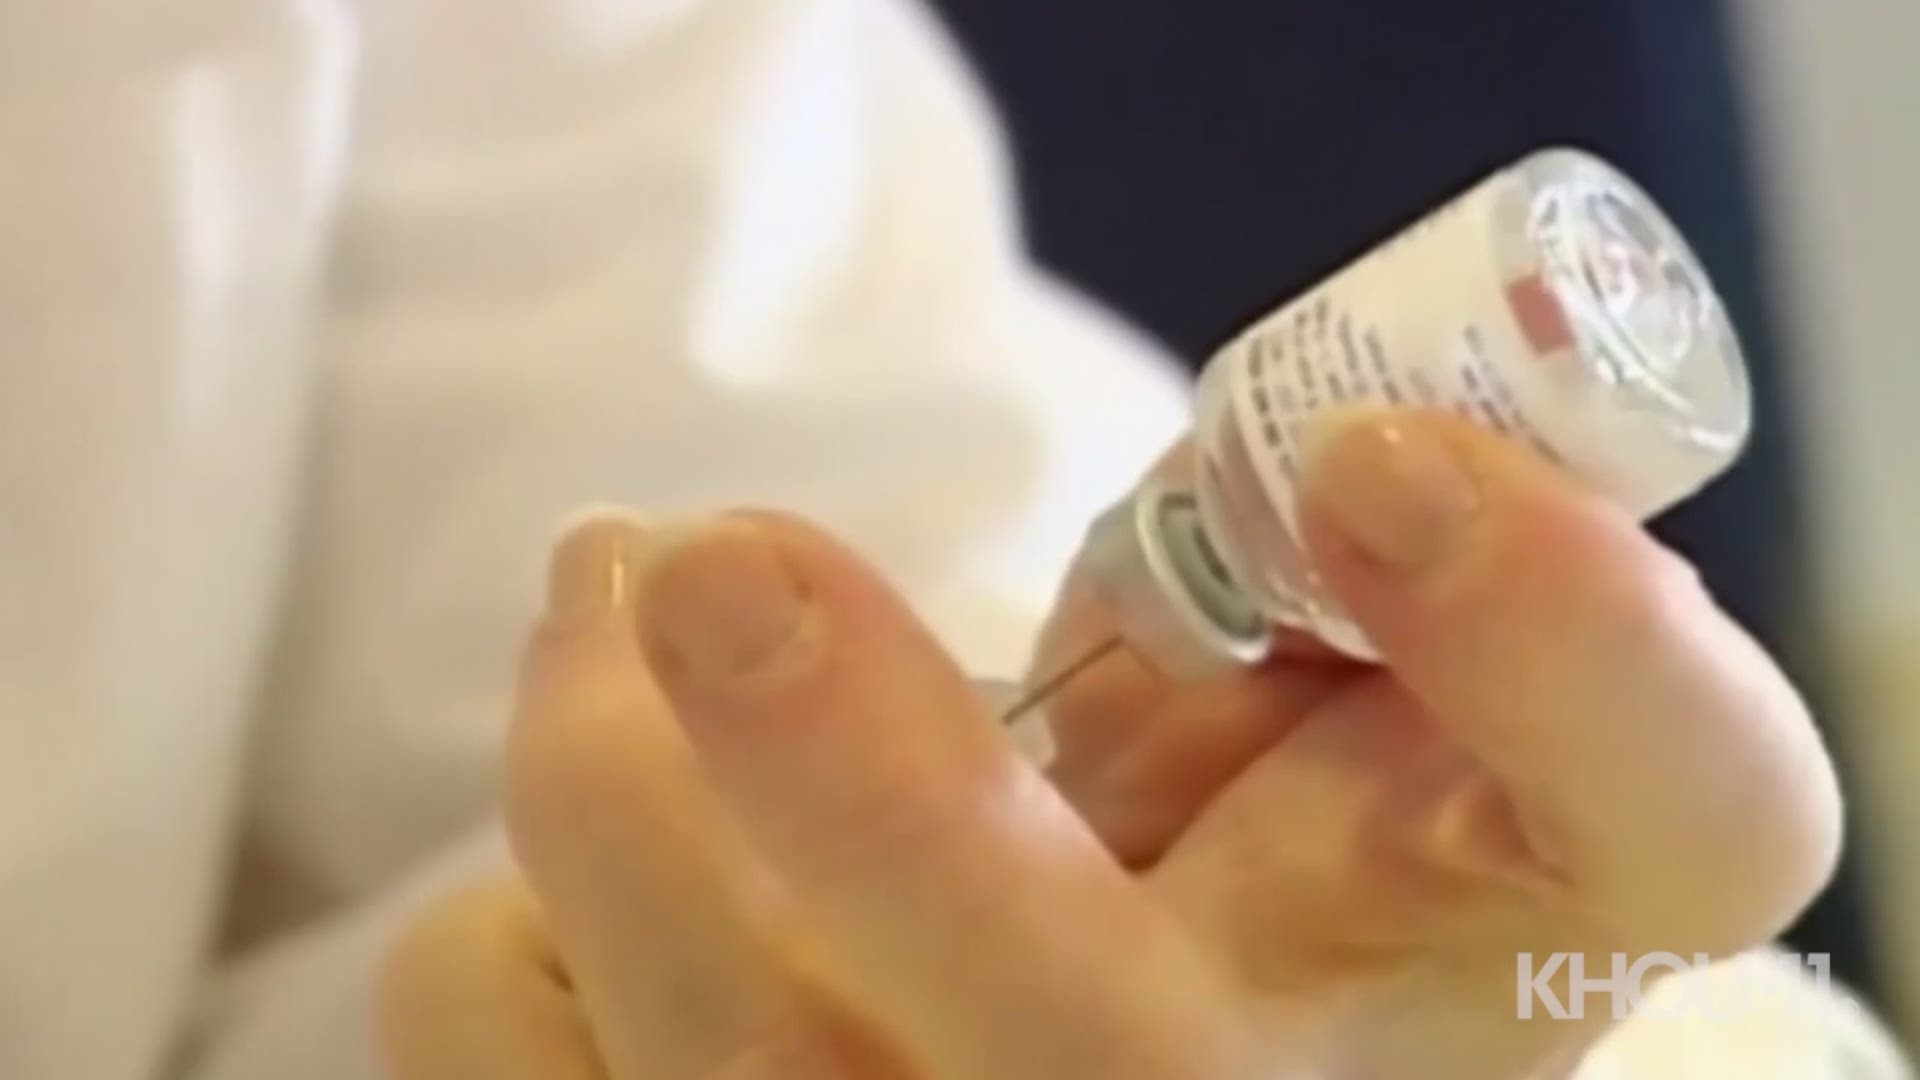 Three measles cases have been confirmed in Harris County. KHOU 11's Doug Delony reports.